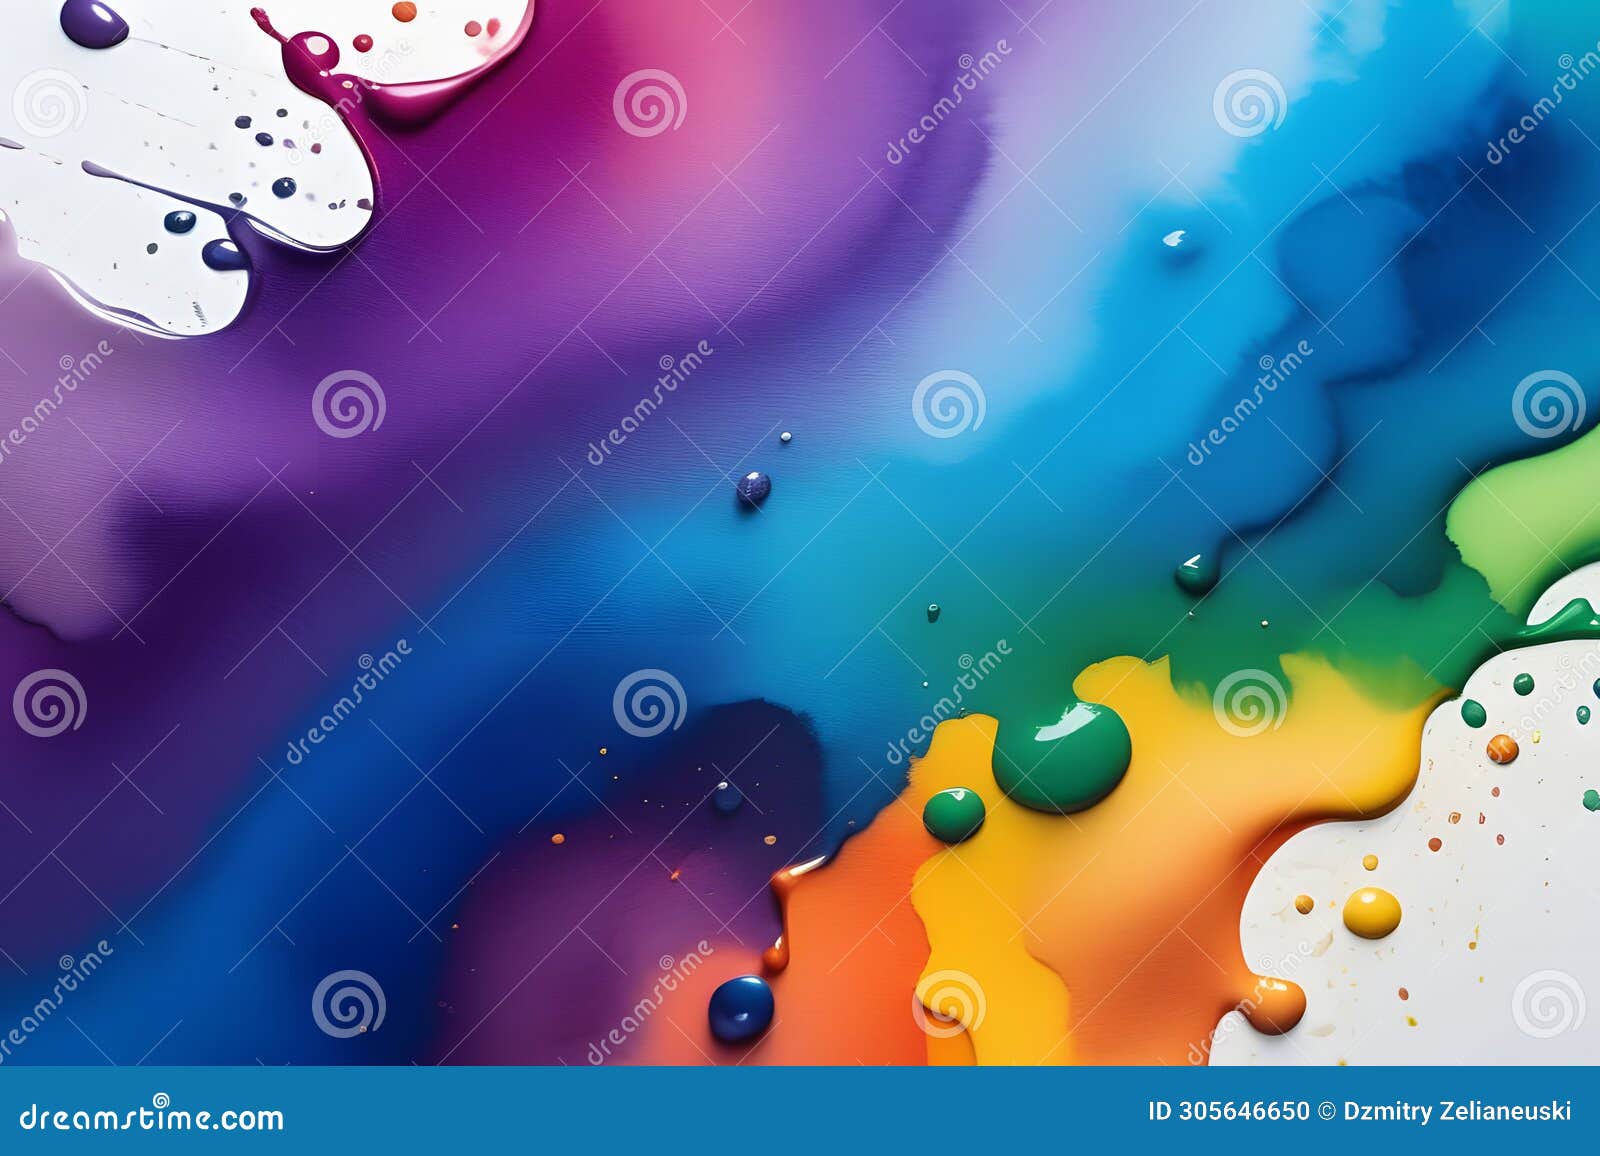 multicolor abstract aquarela background. perfect for website, social media, and print projects